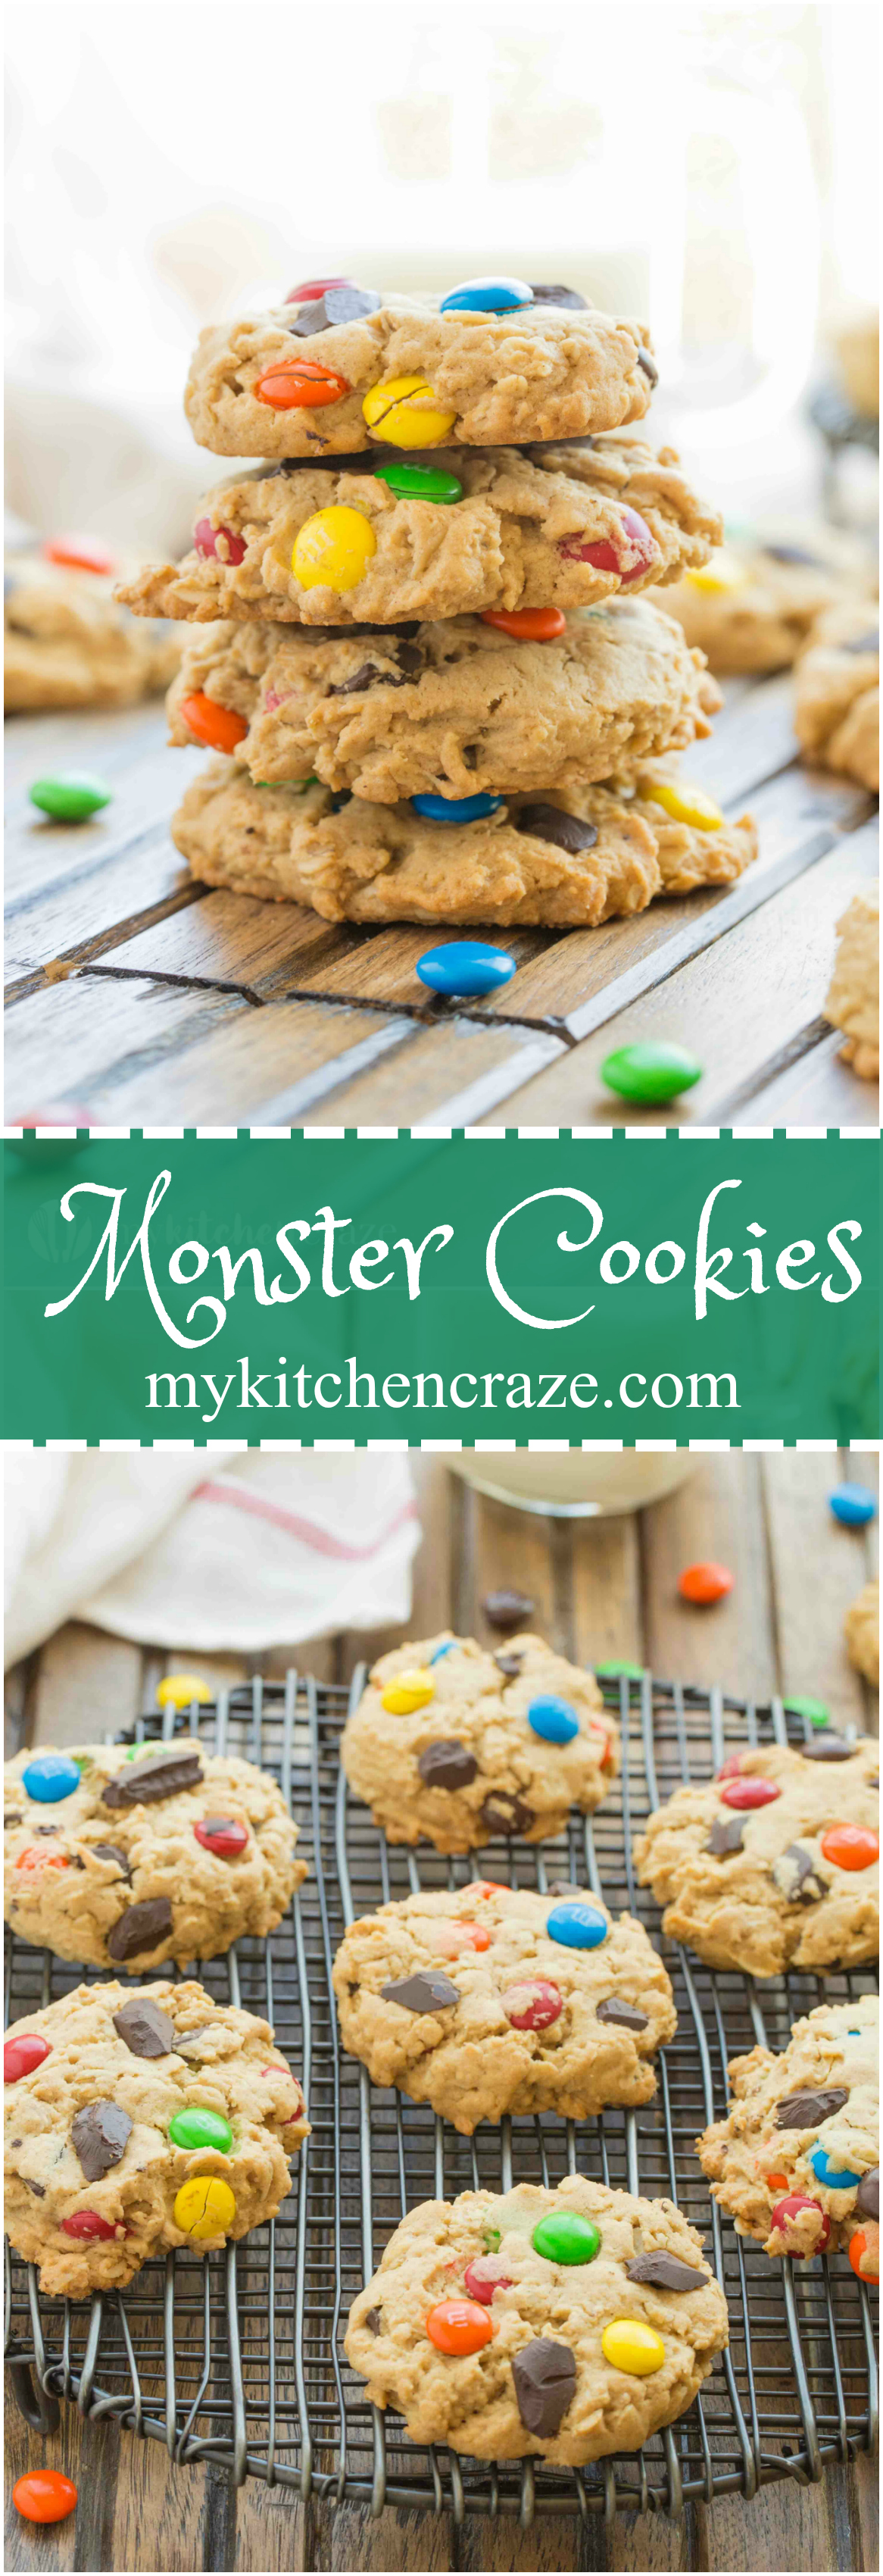 Monster Cookies are everything you want in a cookie and more. These cookies are loaded with bright colorful chocolate candies, chocolate chips, peanut butter and oats. Delicious!